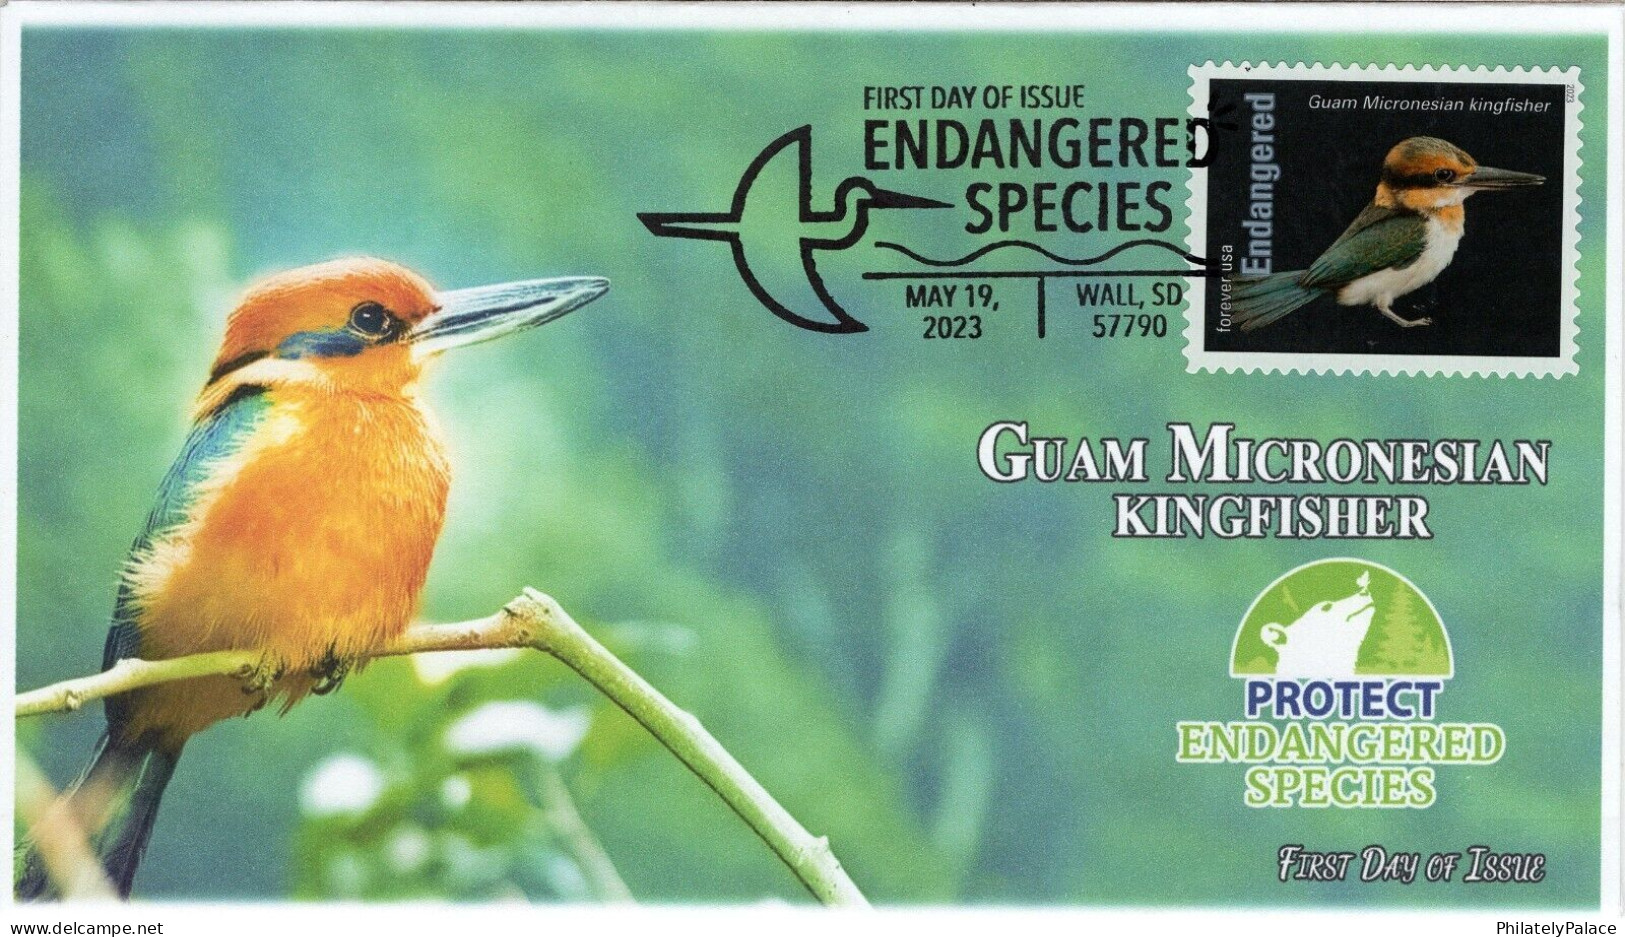 USA 2023 Guam Micronesian Kingfisher, River, Endangered Species, Bird,Pictorial Postmark, FDC Cover (**) - Lettres & Documents